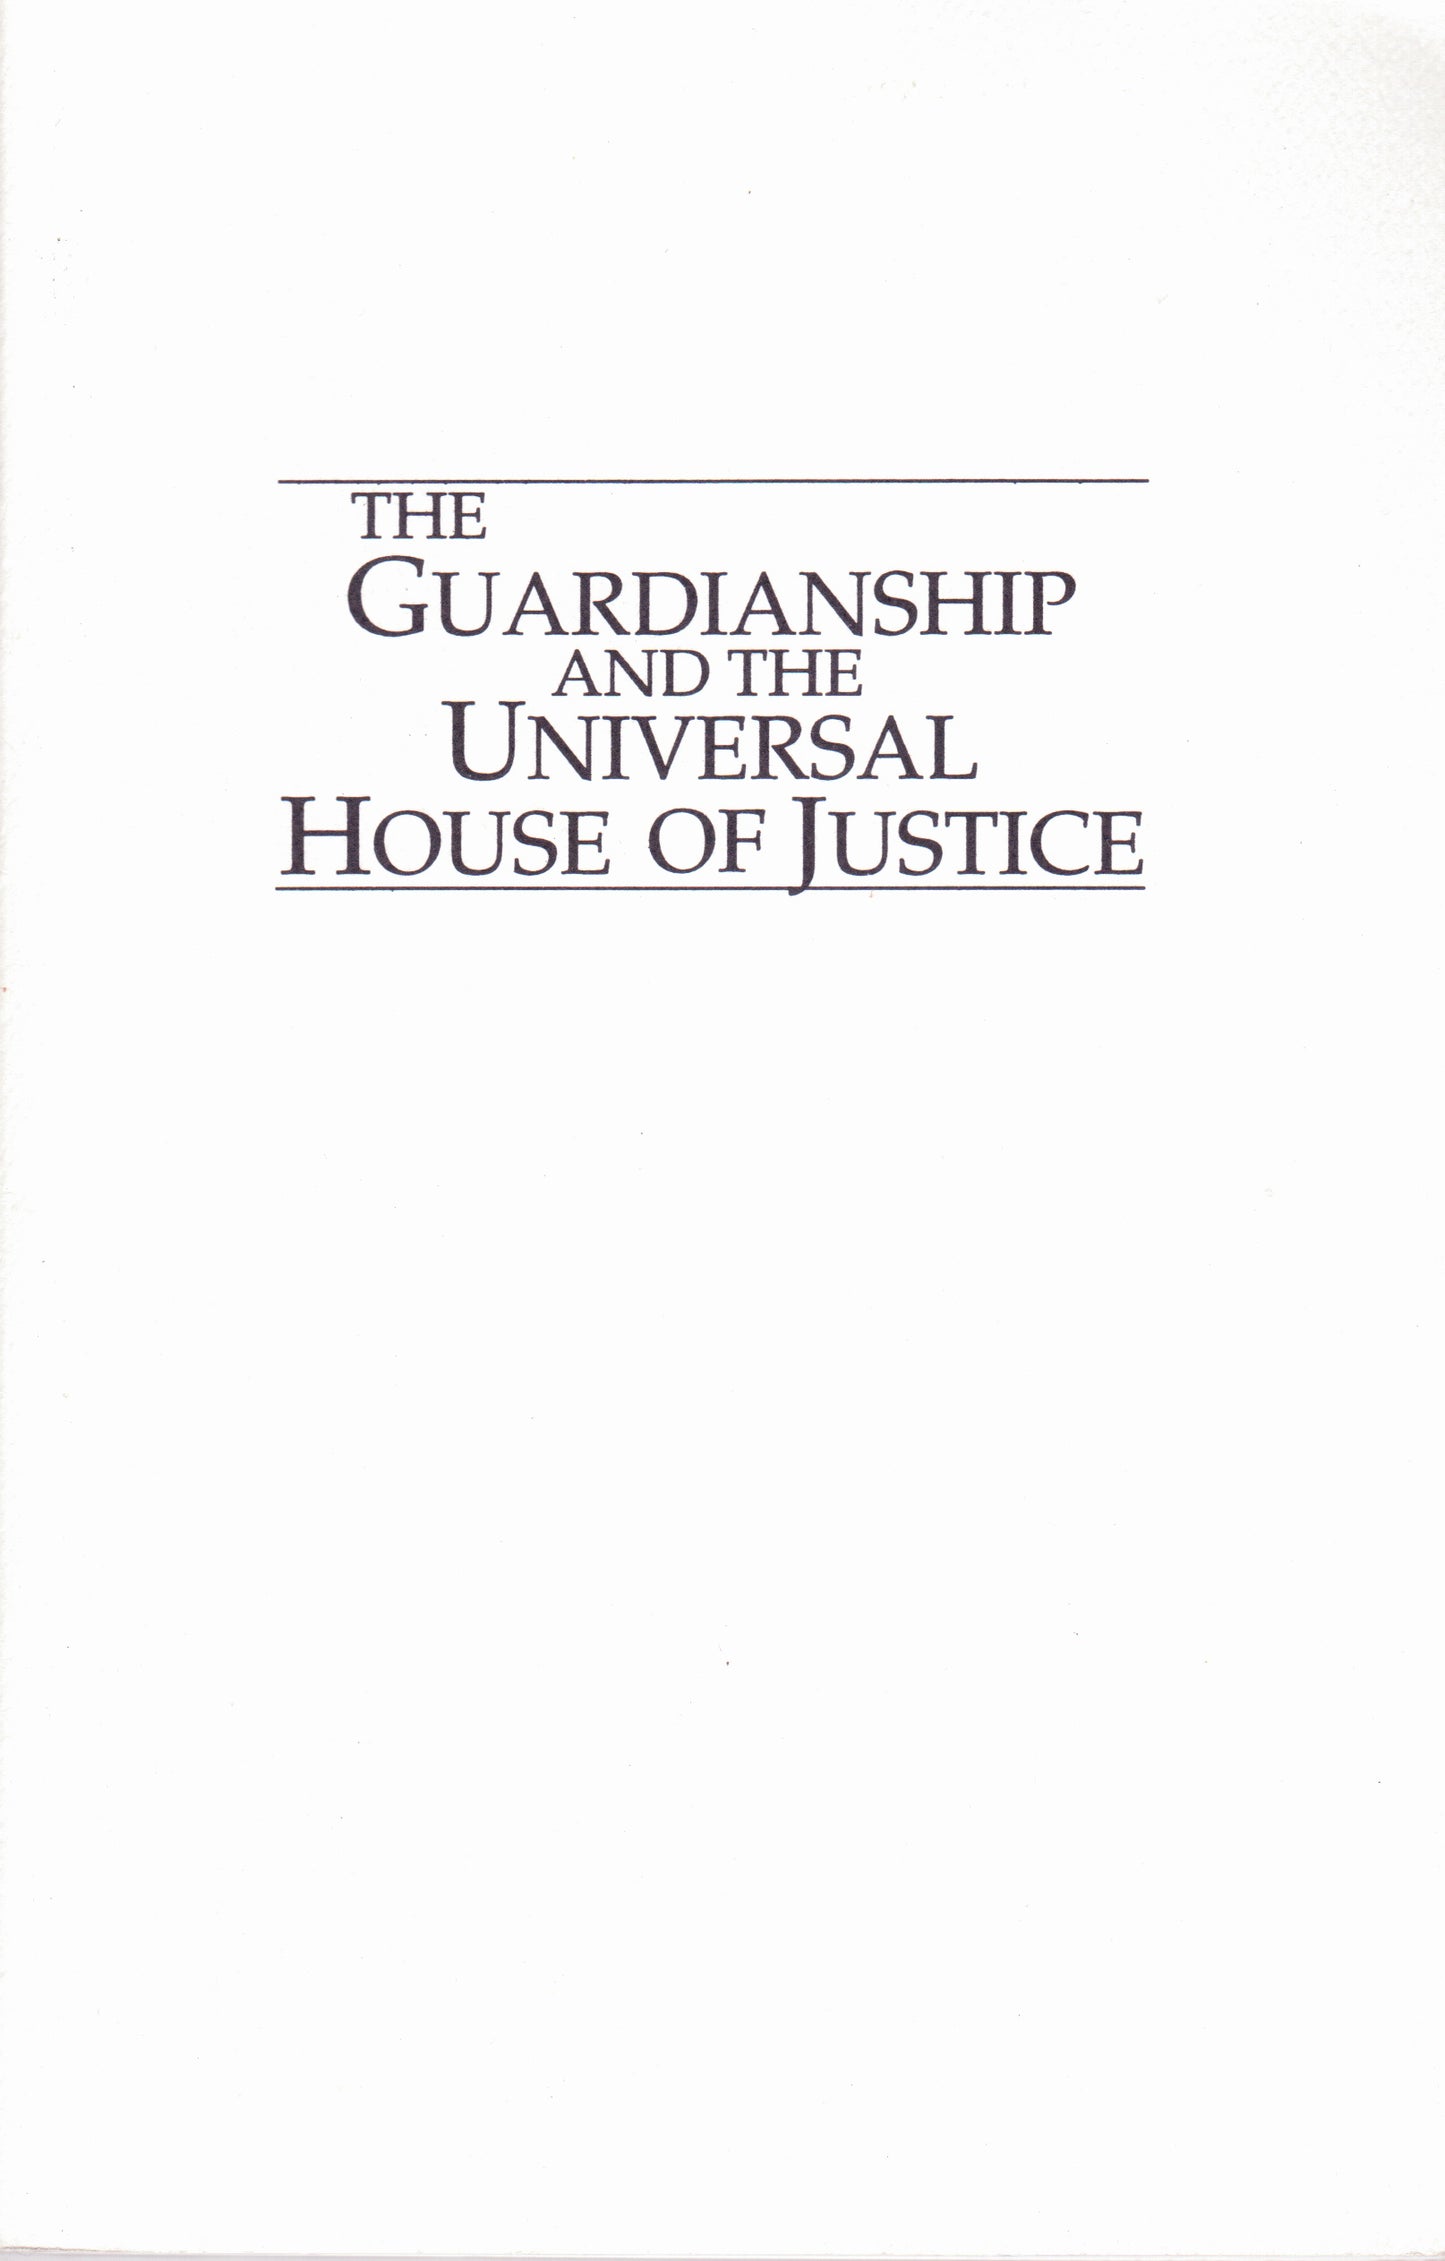 Guardianship and the Universal House of Justice